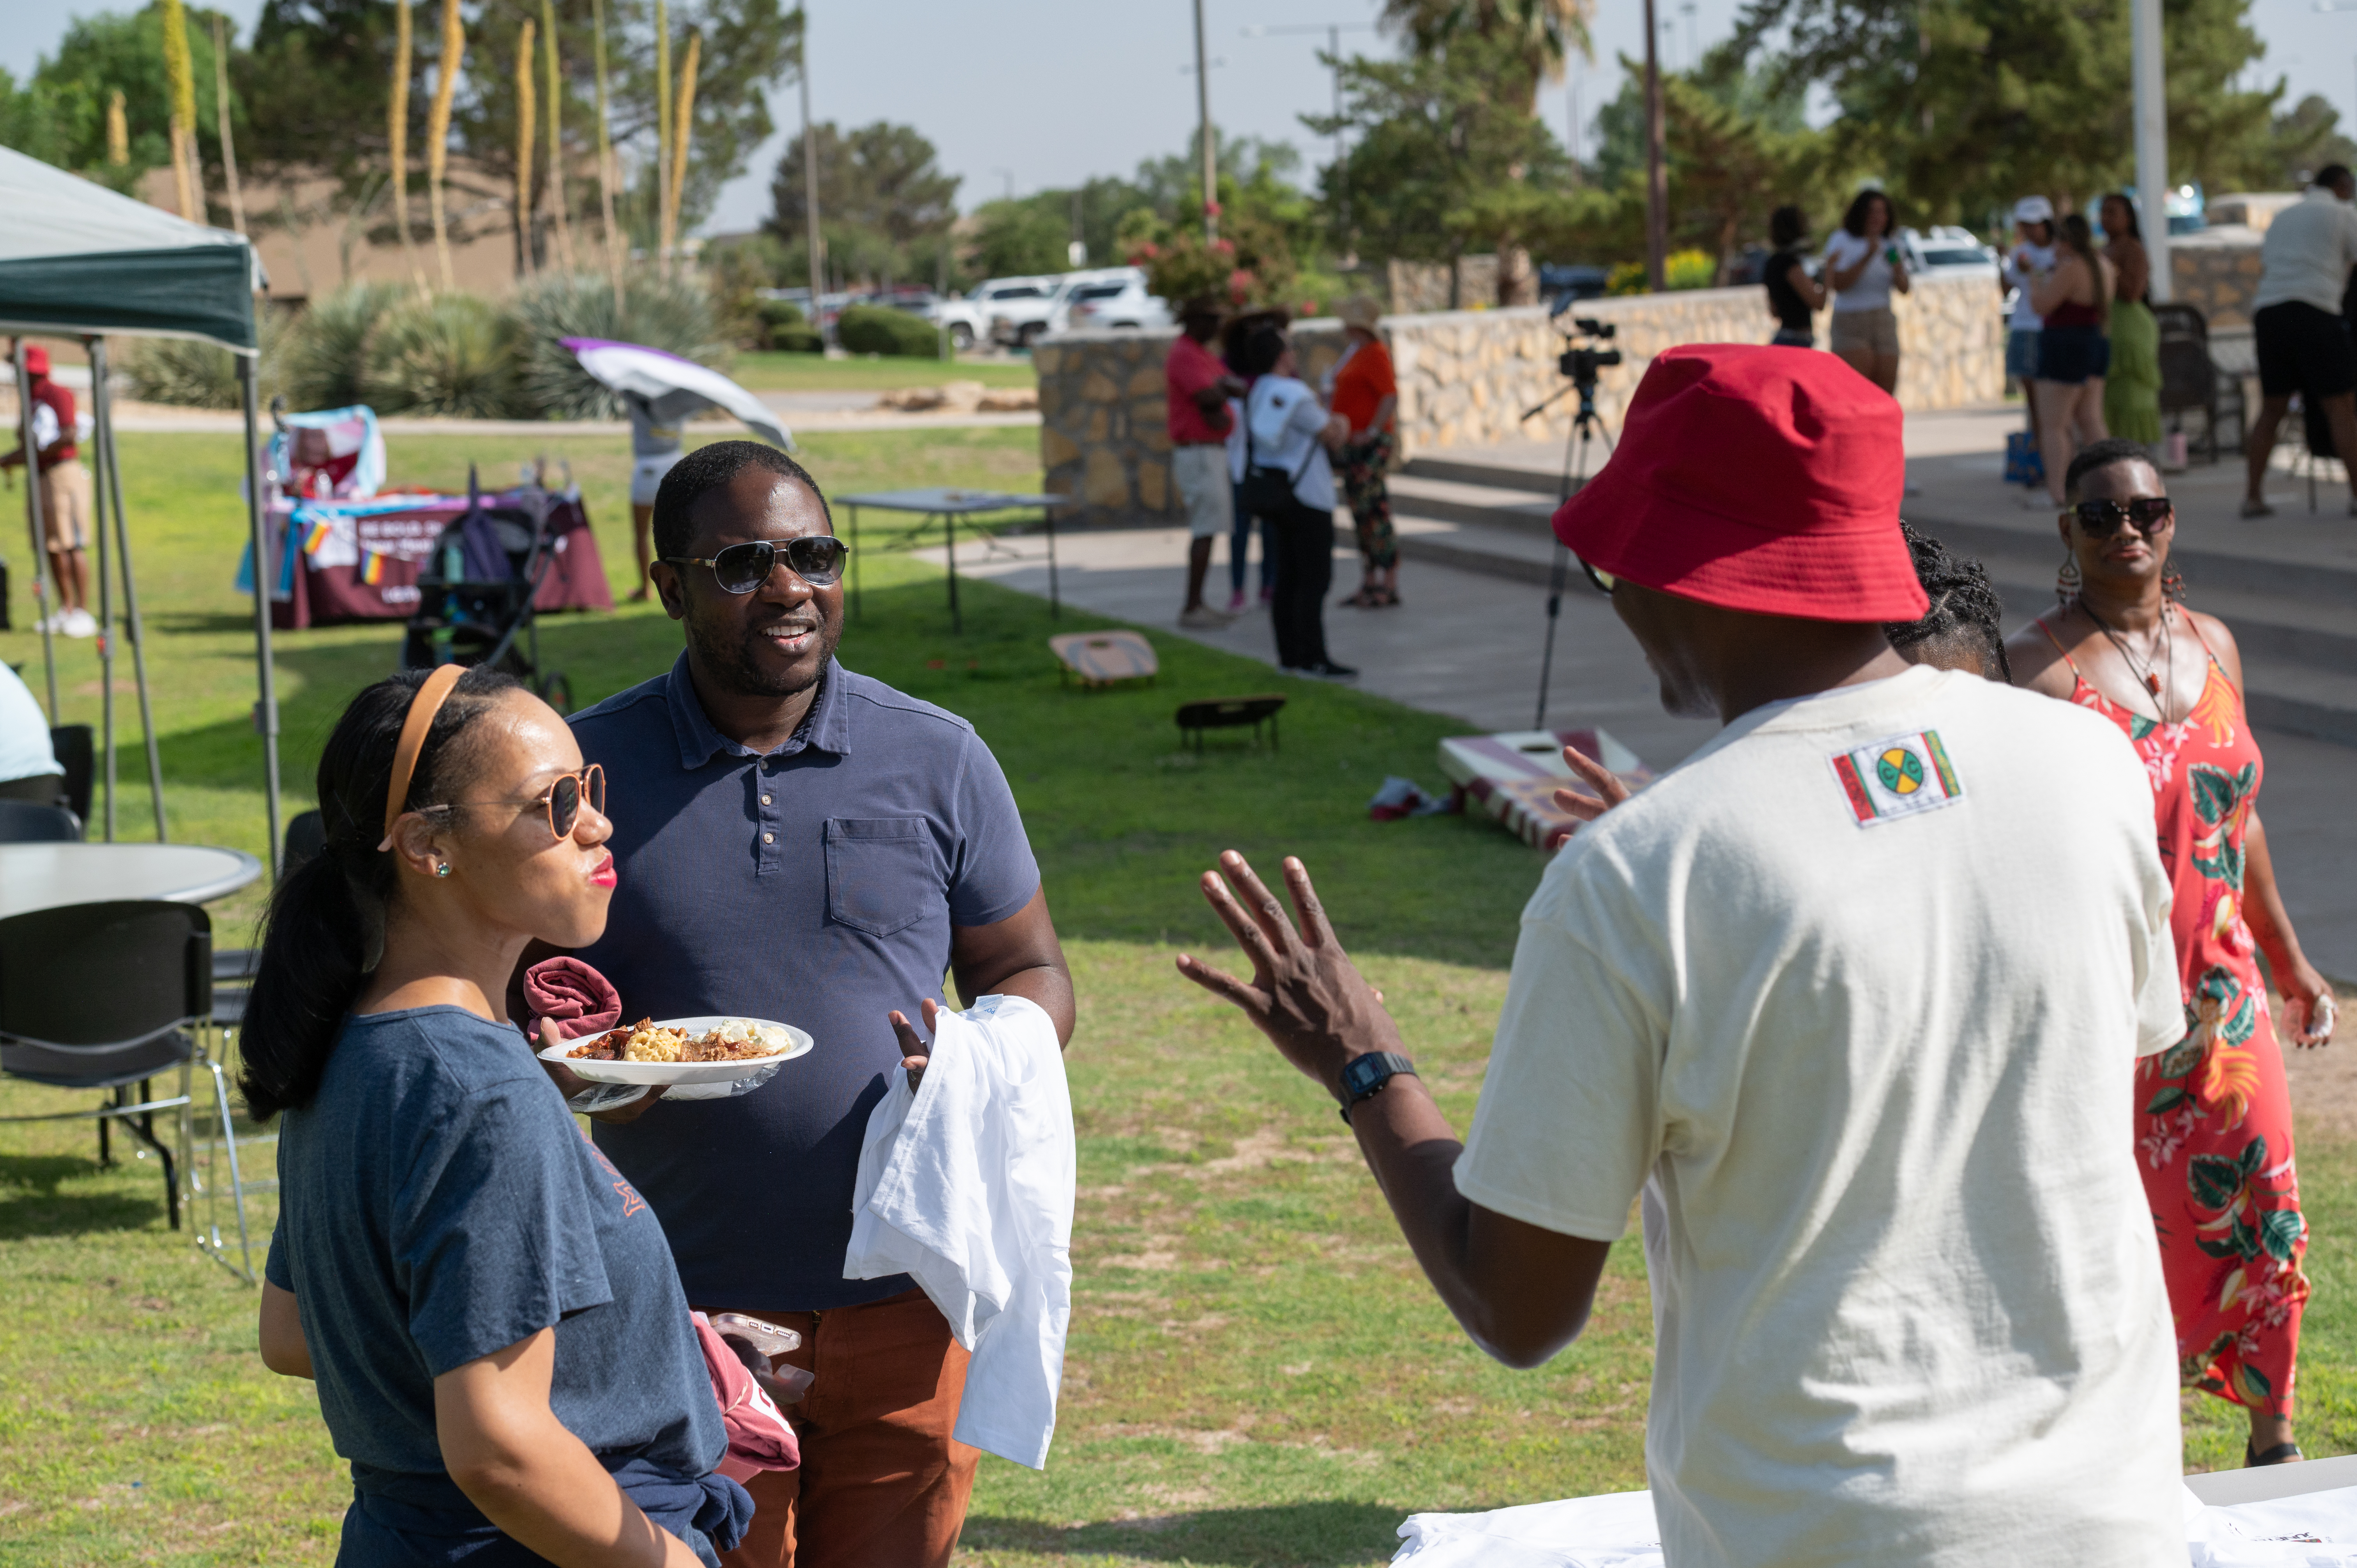 The image portrays a casual outdoor gathering or community event in a park. In the foreground, three individuals are engaged in conversation. On the left, a woman in sunglasses and a blue shirt holds a plate of food. To her right, a man wearing sunglasses and a navy blue polo shirt stands holding a white cloth. Both are facing a man wearing a red bucket hat and a light-colored t-shirt with a small, colorful emblem on the back. The man in the hat has his hand raised, gesturing as he speaks.  In the background, the park features green grass, several large desert plants, and trees. A few people are dispersed across the area, talking and walking around. There are folding tables, chairs, and canopies set up. A banner or informational booth is visible in the background near the top left. The atmosphere appears relaxed and sociable.